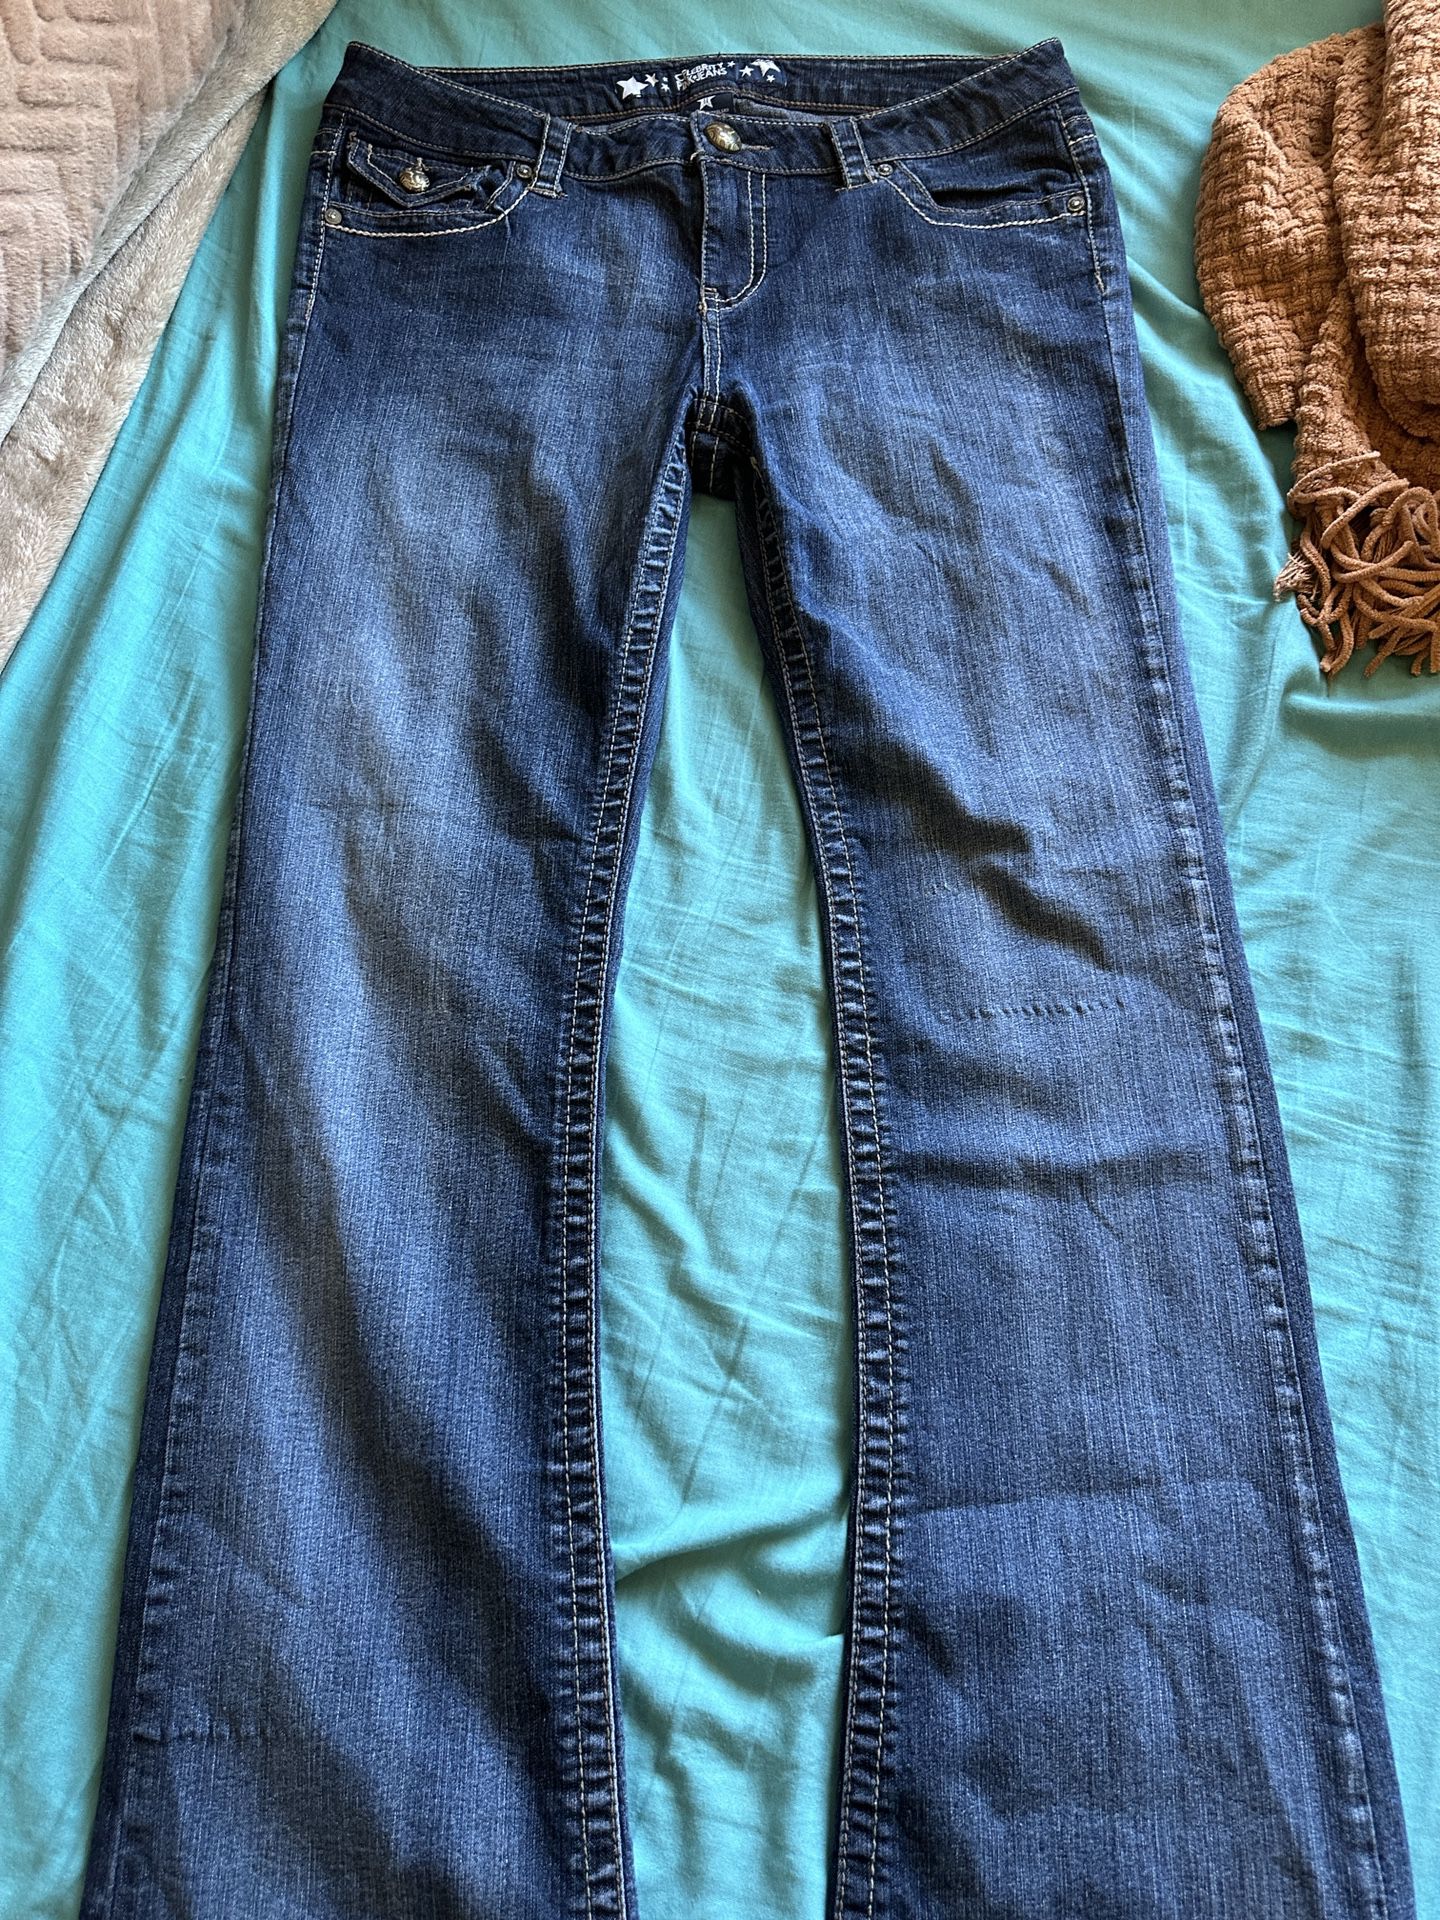 Women’s Country Flared Jeans- Size 11